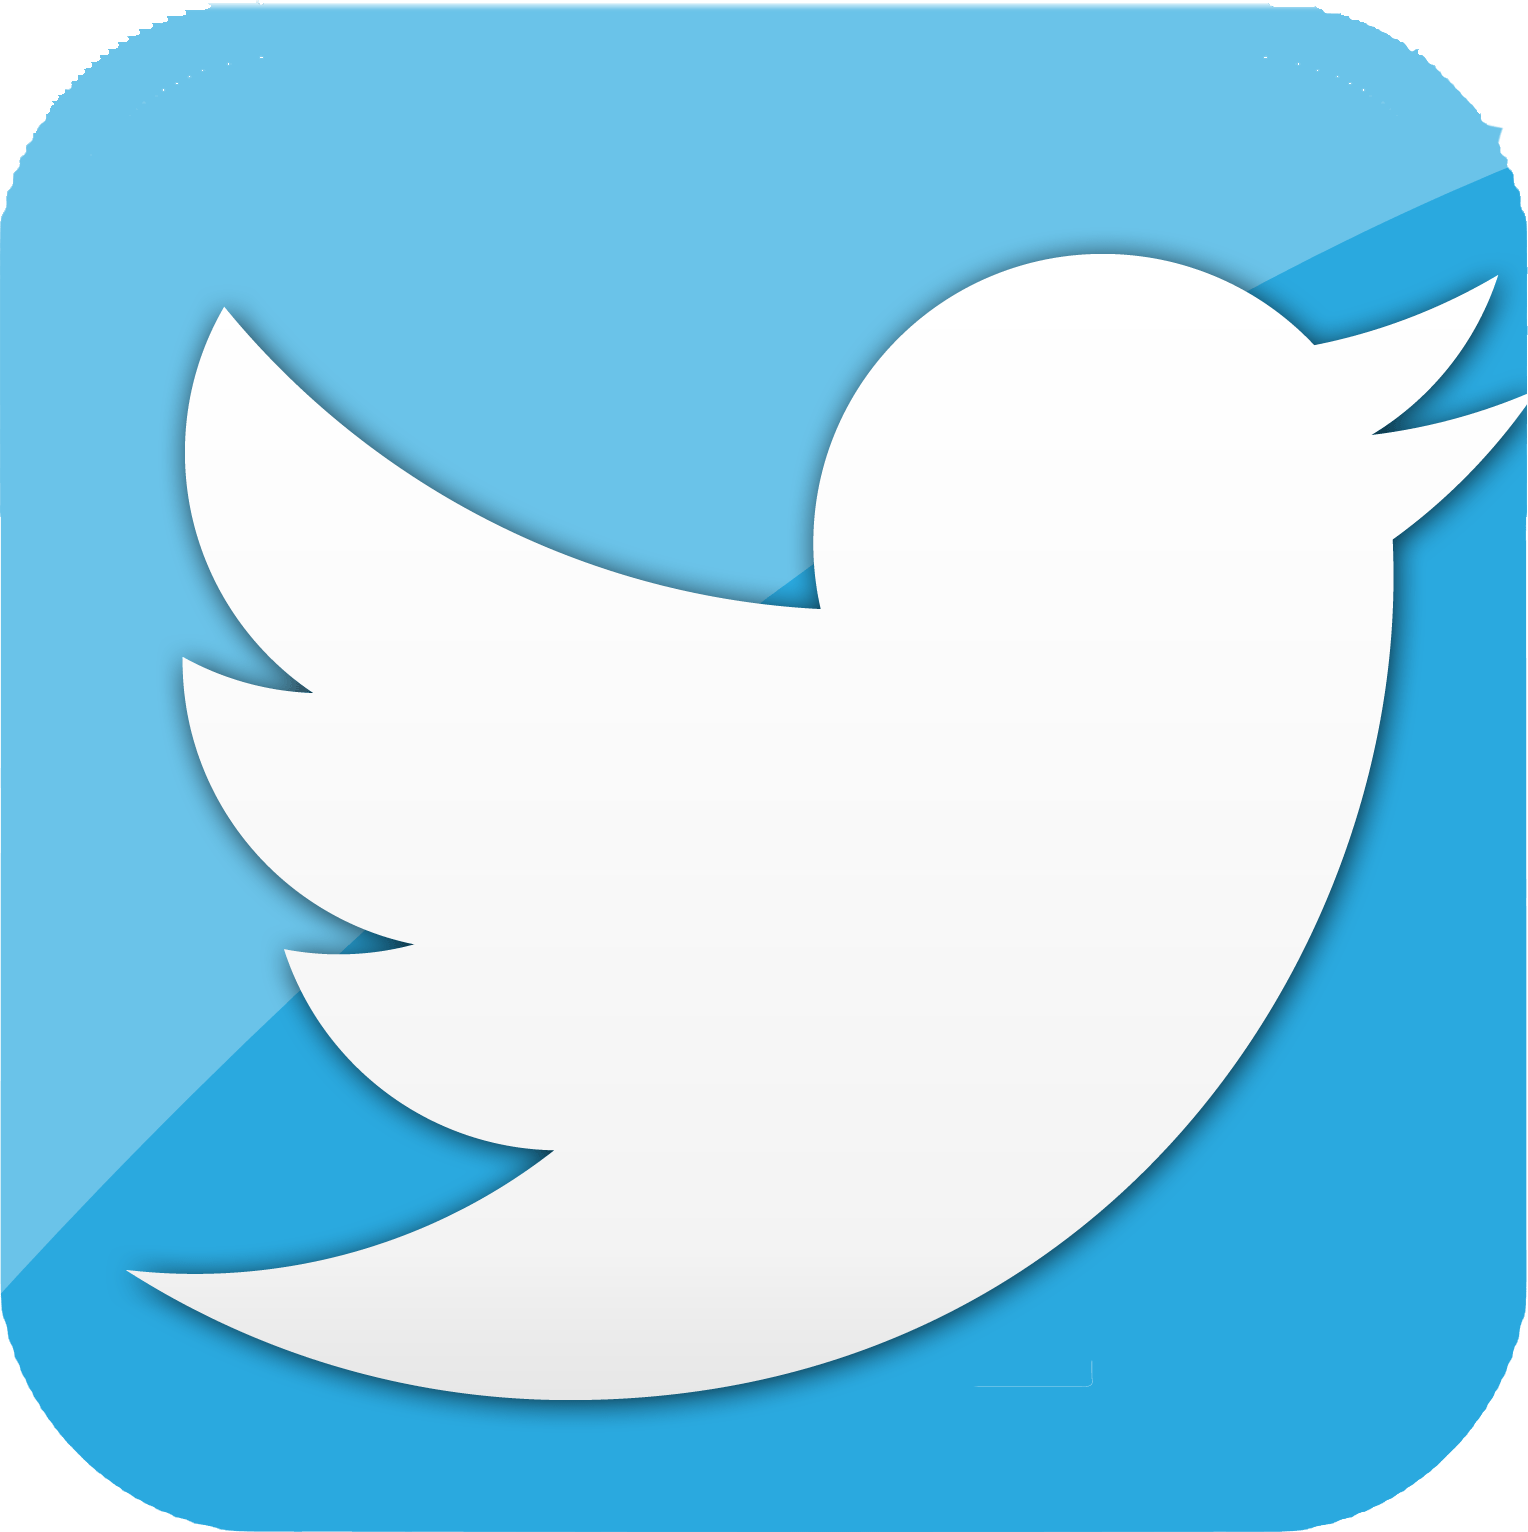 What would happen if Google bought Twitter? | AndroidPIT